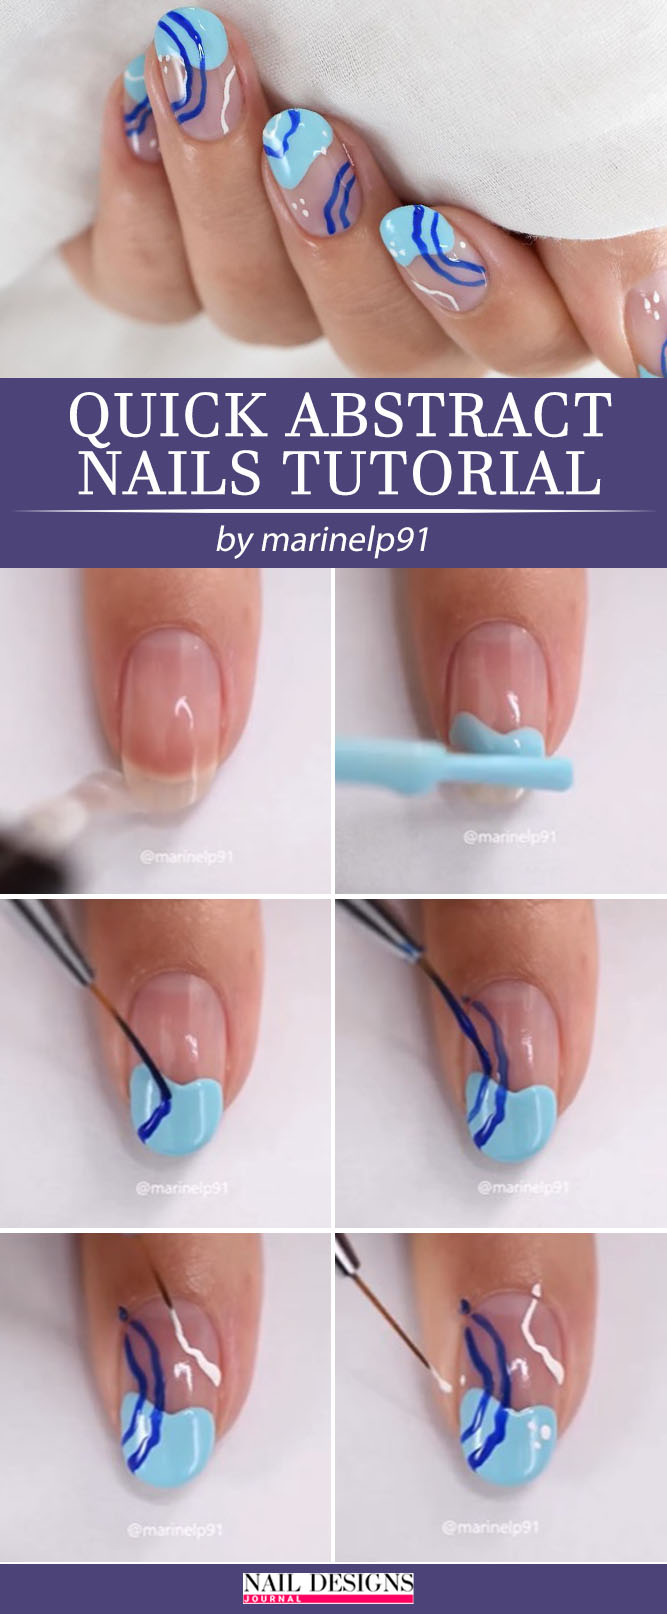 Quick Abstract Nails Tutorial